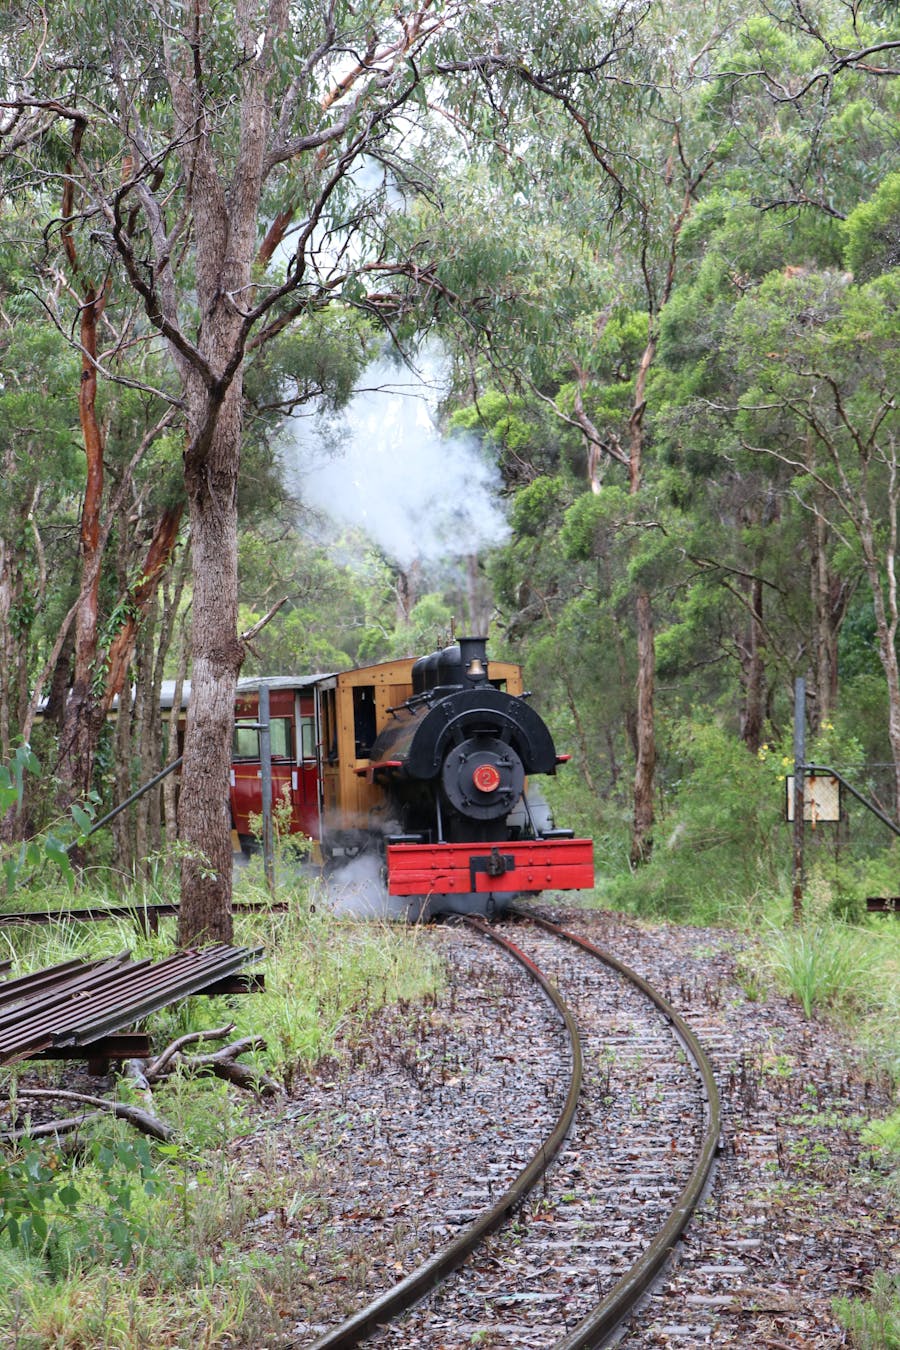 Mothers Day Express at The Illawarra Train Museum